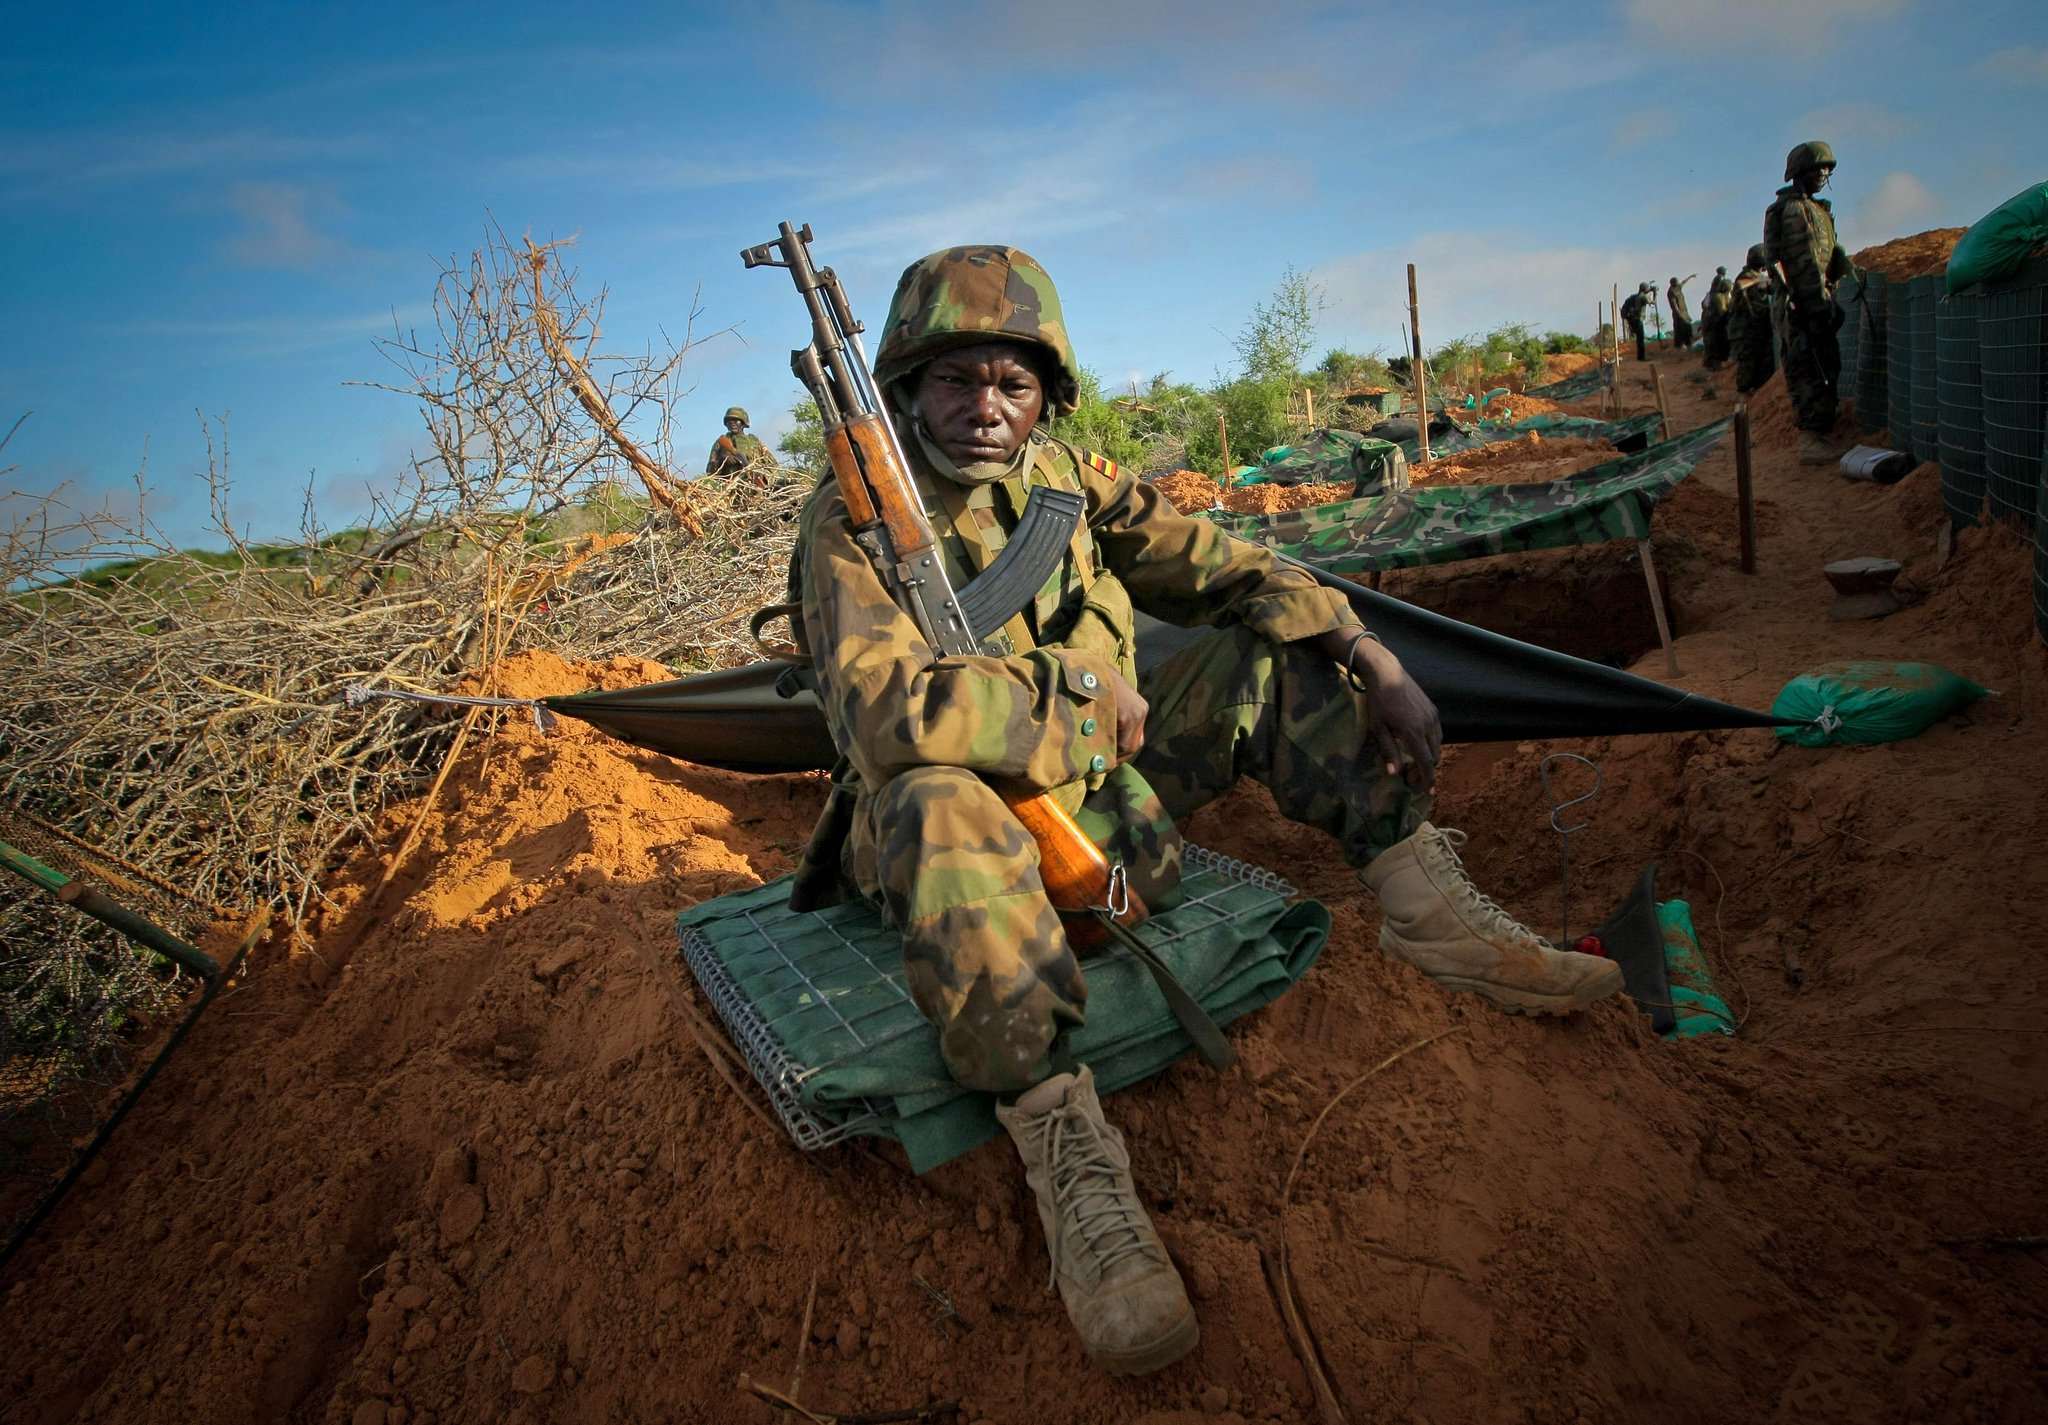 Ugandan soldiers serving with the African Union Mission in Somalia (AMISOM) man the frontline near Mogadishu, 2012 © AMISOM